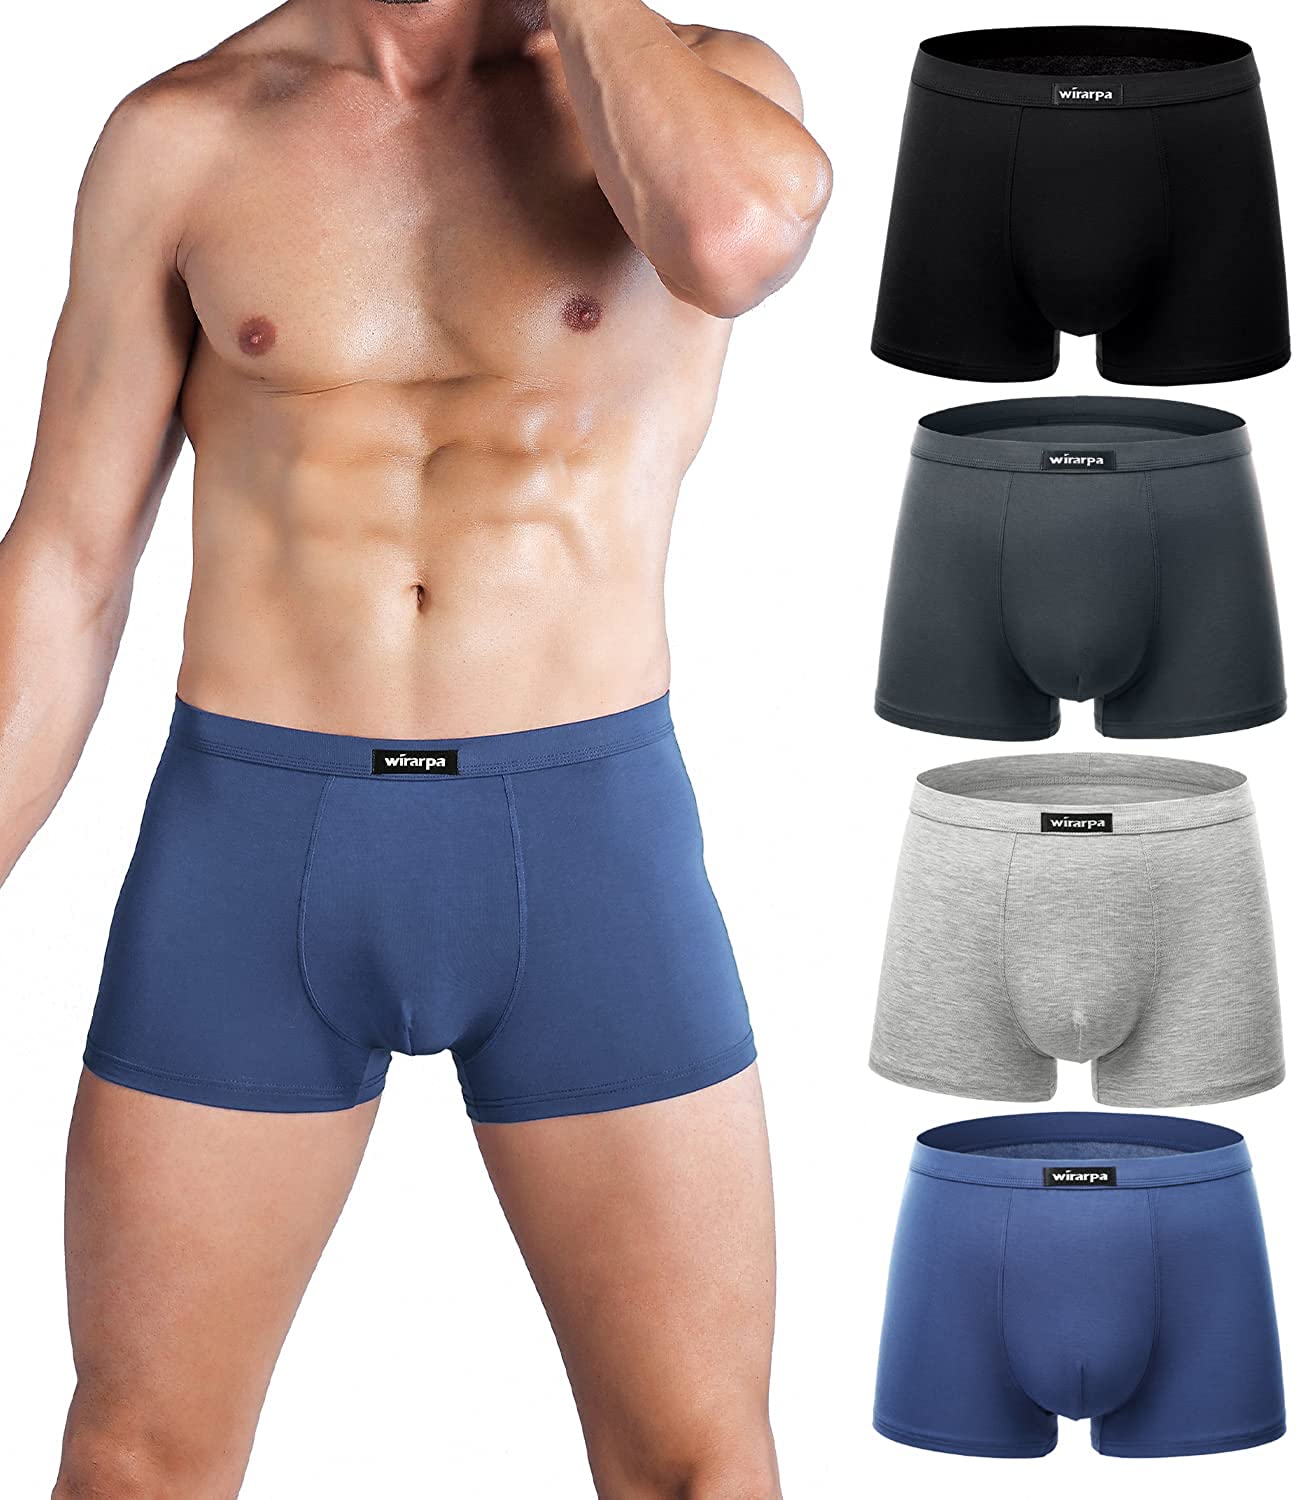 wirarpa Men's Modal Briefs Underwear Soft Microfibre Underpants No Front  Silky Touch Slips Covered Waistband Multipack